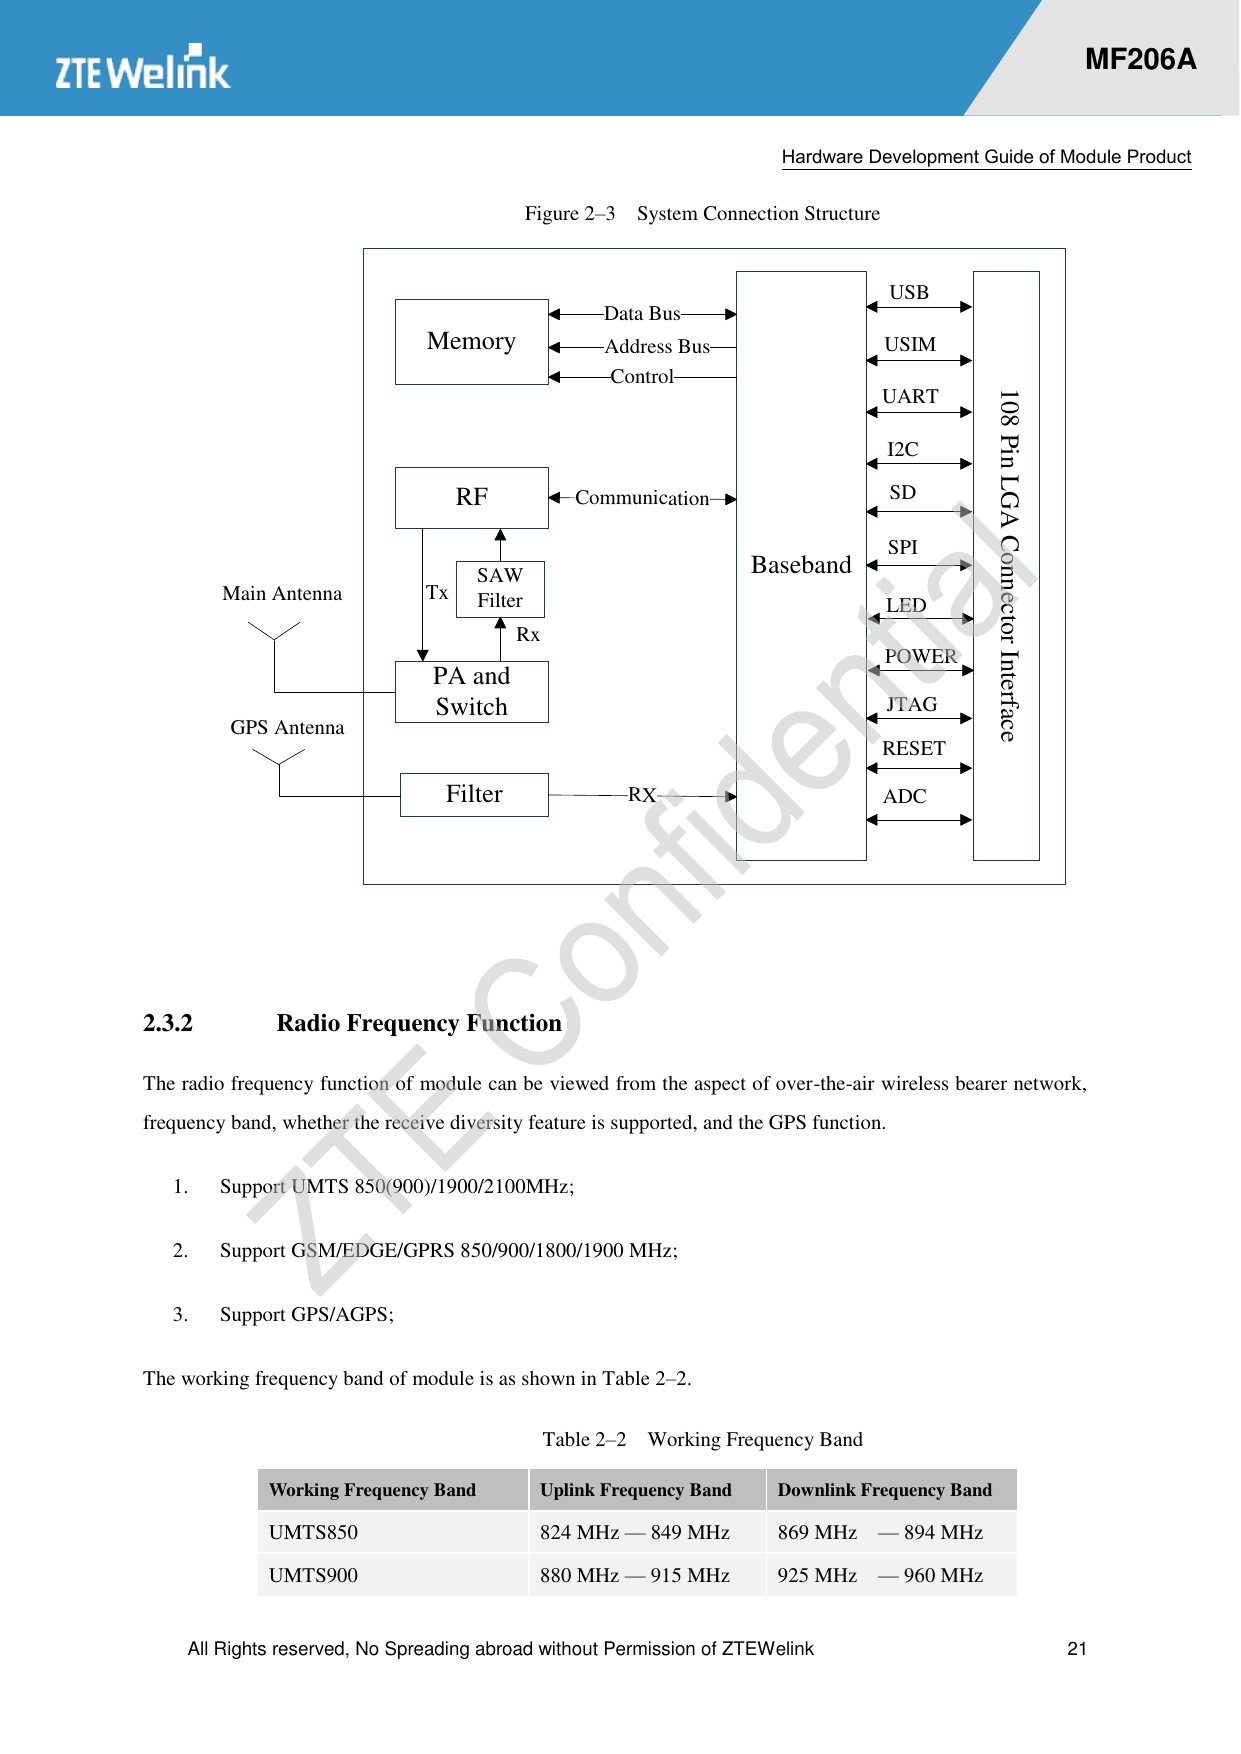  Hardware Development Guide of Module Product  All Rights reserved, No Spreading abroad without Permission of ZTEWelink  21    MF206A Figure 2–3  System Connection Structure  PA and SwitchRFBasebandMemory108 Pin LGA Connector InterfaceUSBUSIMUARTI2CSDSPILEDPOWERJTAGRESETData BusAddress BusControlCommunicationTx SAW FilterMain AntennaFilterRXGPS AntennaRxADC  2.3.2 Radio Frequency Function The radio frequency function of module can be viewed from the aspect of over-the-air wireless bearer network, frequency band, whether the receive diversity feature is supported, and the GPS function.   1.  Support UMTS 850(900)/1900/2100MHz; 2.  Support GSM/EDGE/GPRS 850/900/1800/1900 MHz;   3.  Support GPS/AGPS;   The working frequency band of module is as shown in Table 2–2.   Table 2–2  Working Frequency Band Working Frequency Band Uplink Frequency Band Downlink Frequency Band UMTS850 824 MHz — 849 MHz 869 MHz    — 894 MHz UMTS900 880 MHz — 915 MHz 925 MHz    — 960 MHz 